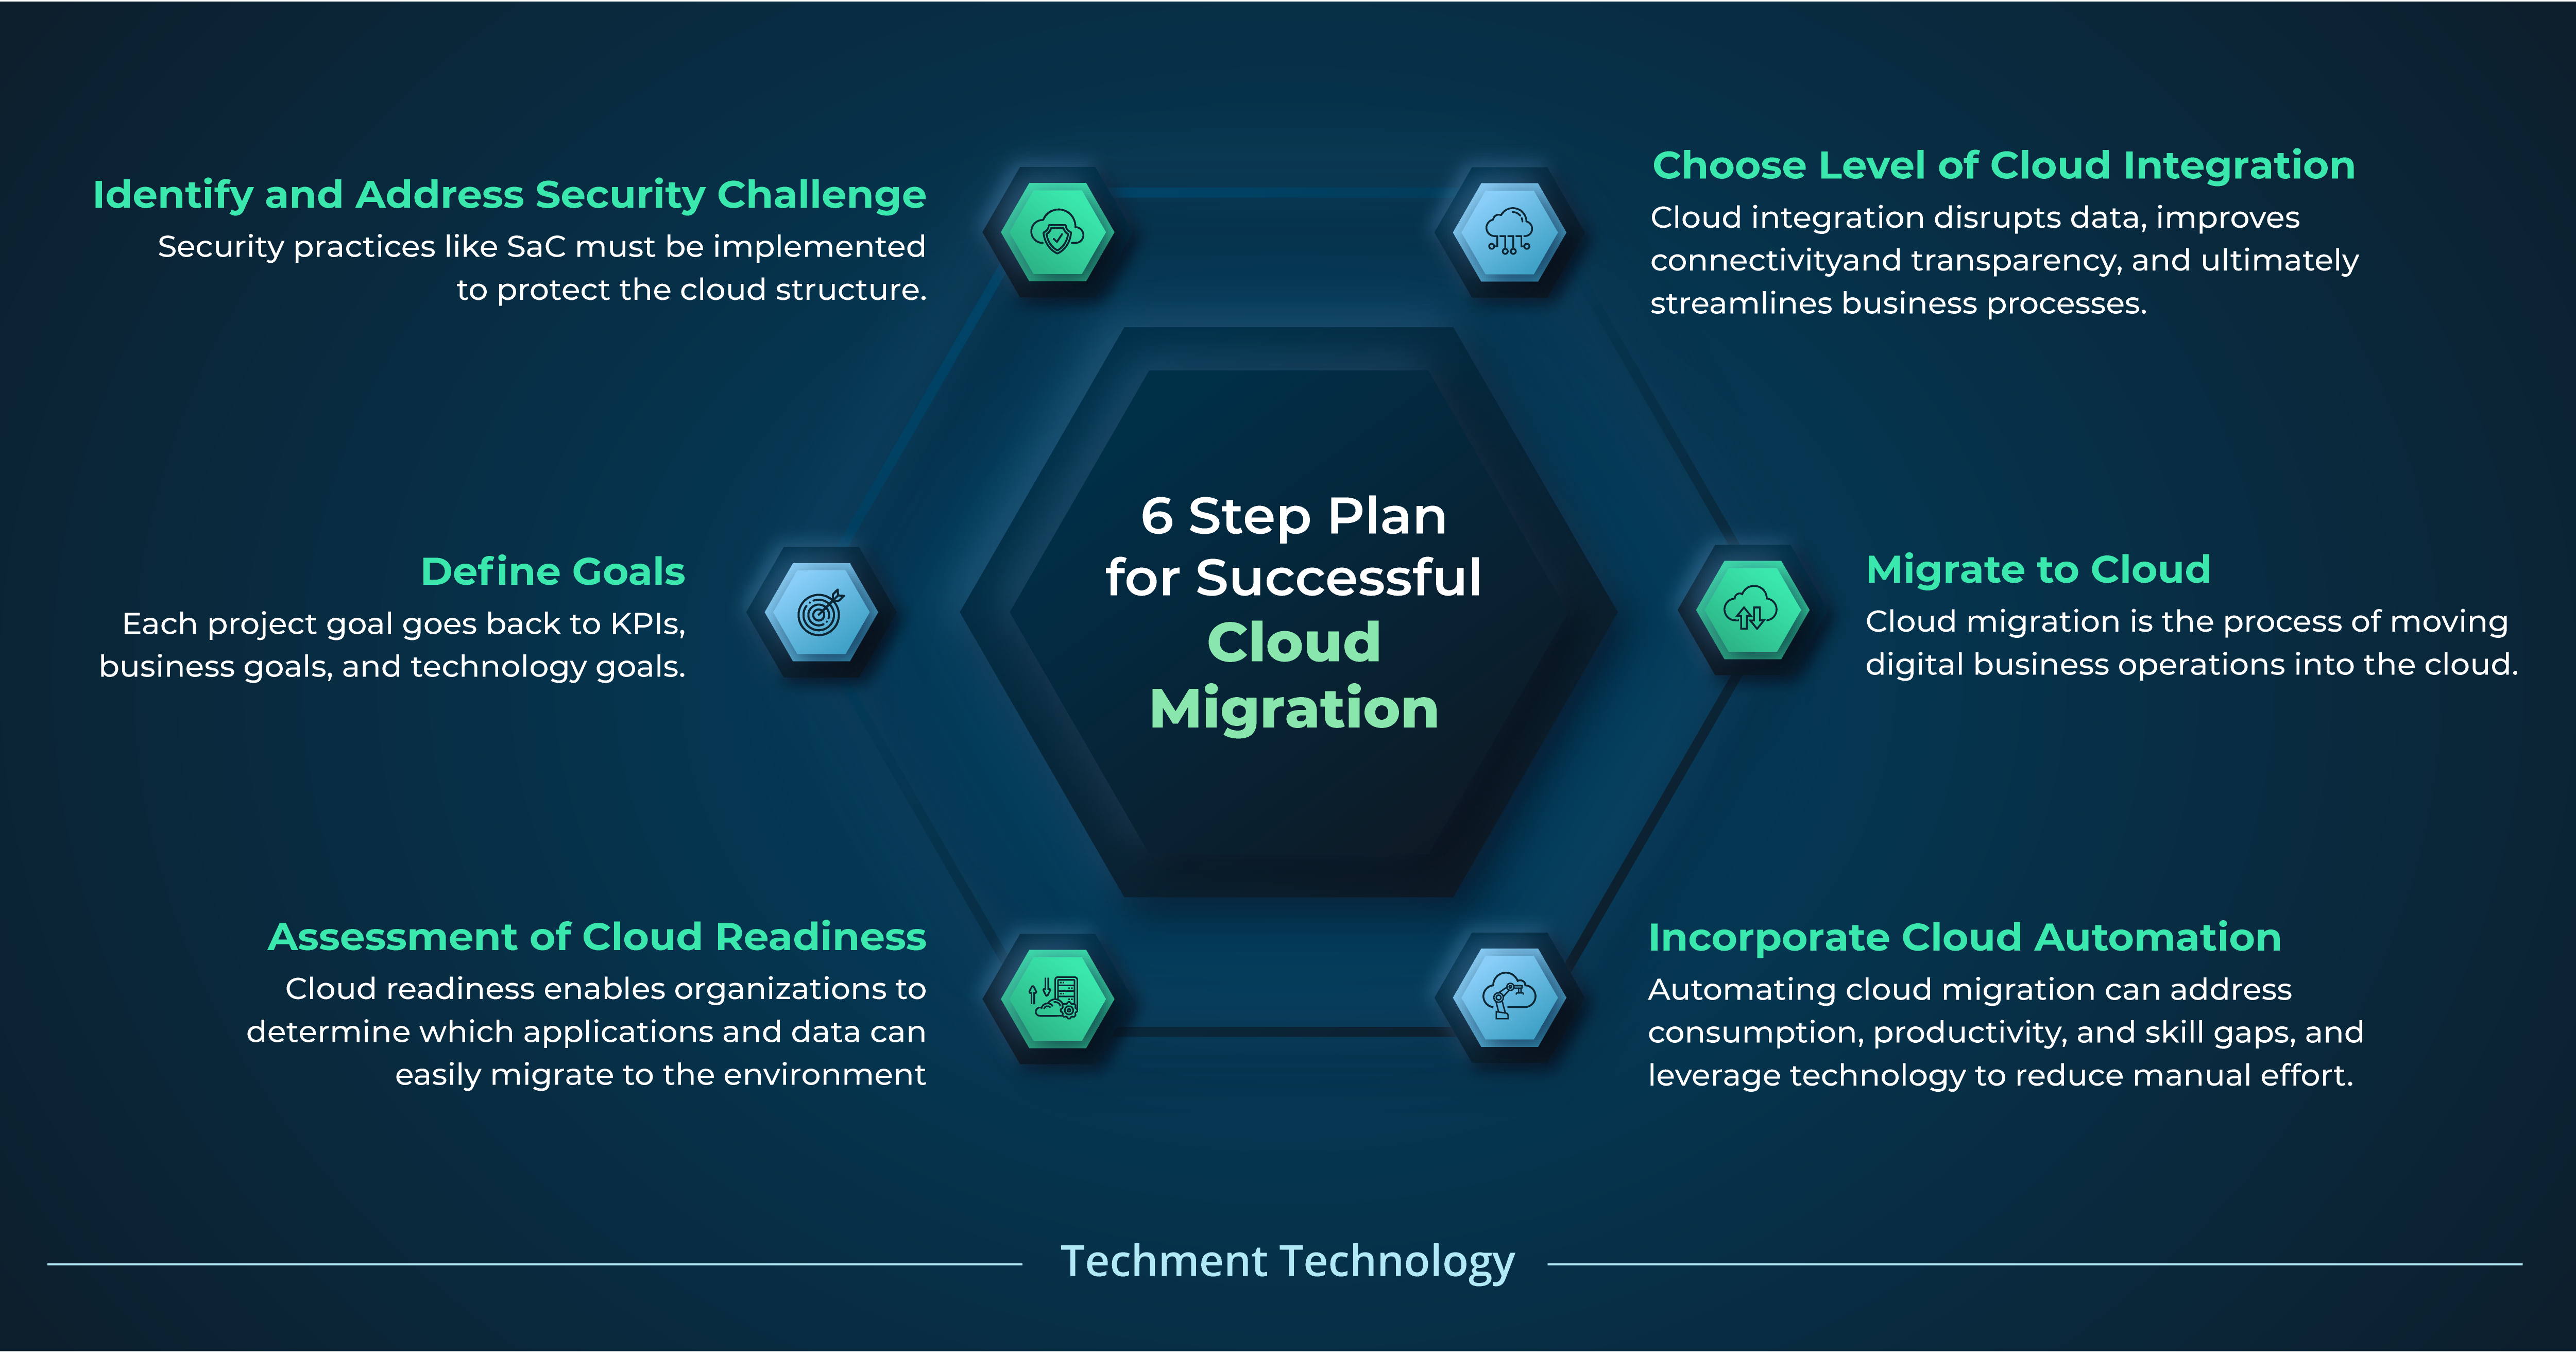 5 Primary Approaches of Incorporating Cloud Culture in Enterprises